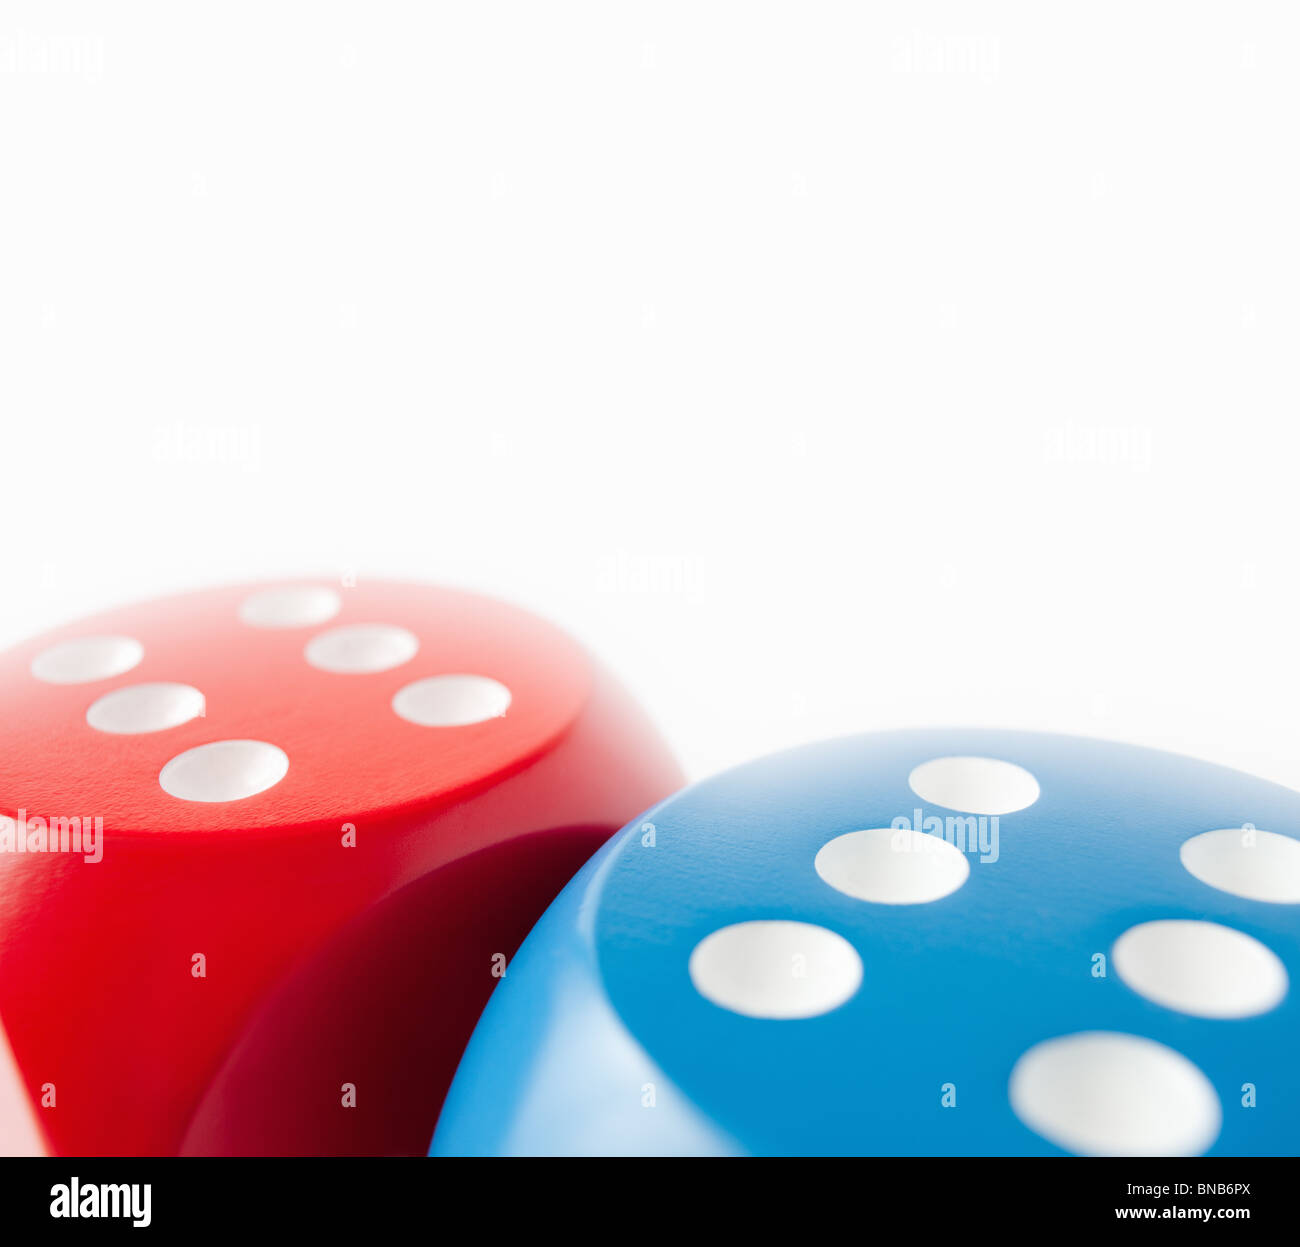 Two dice showing sixes Stock Photo